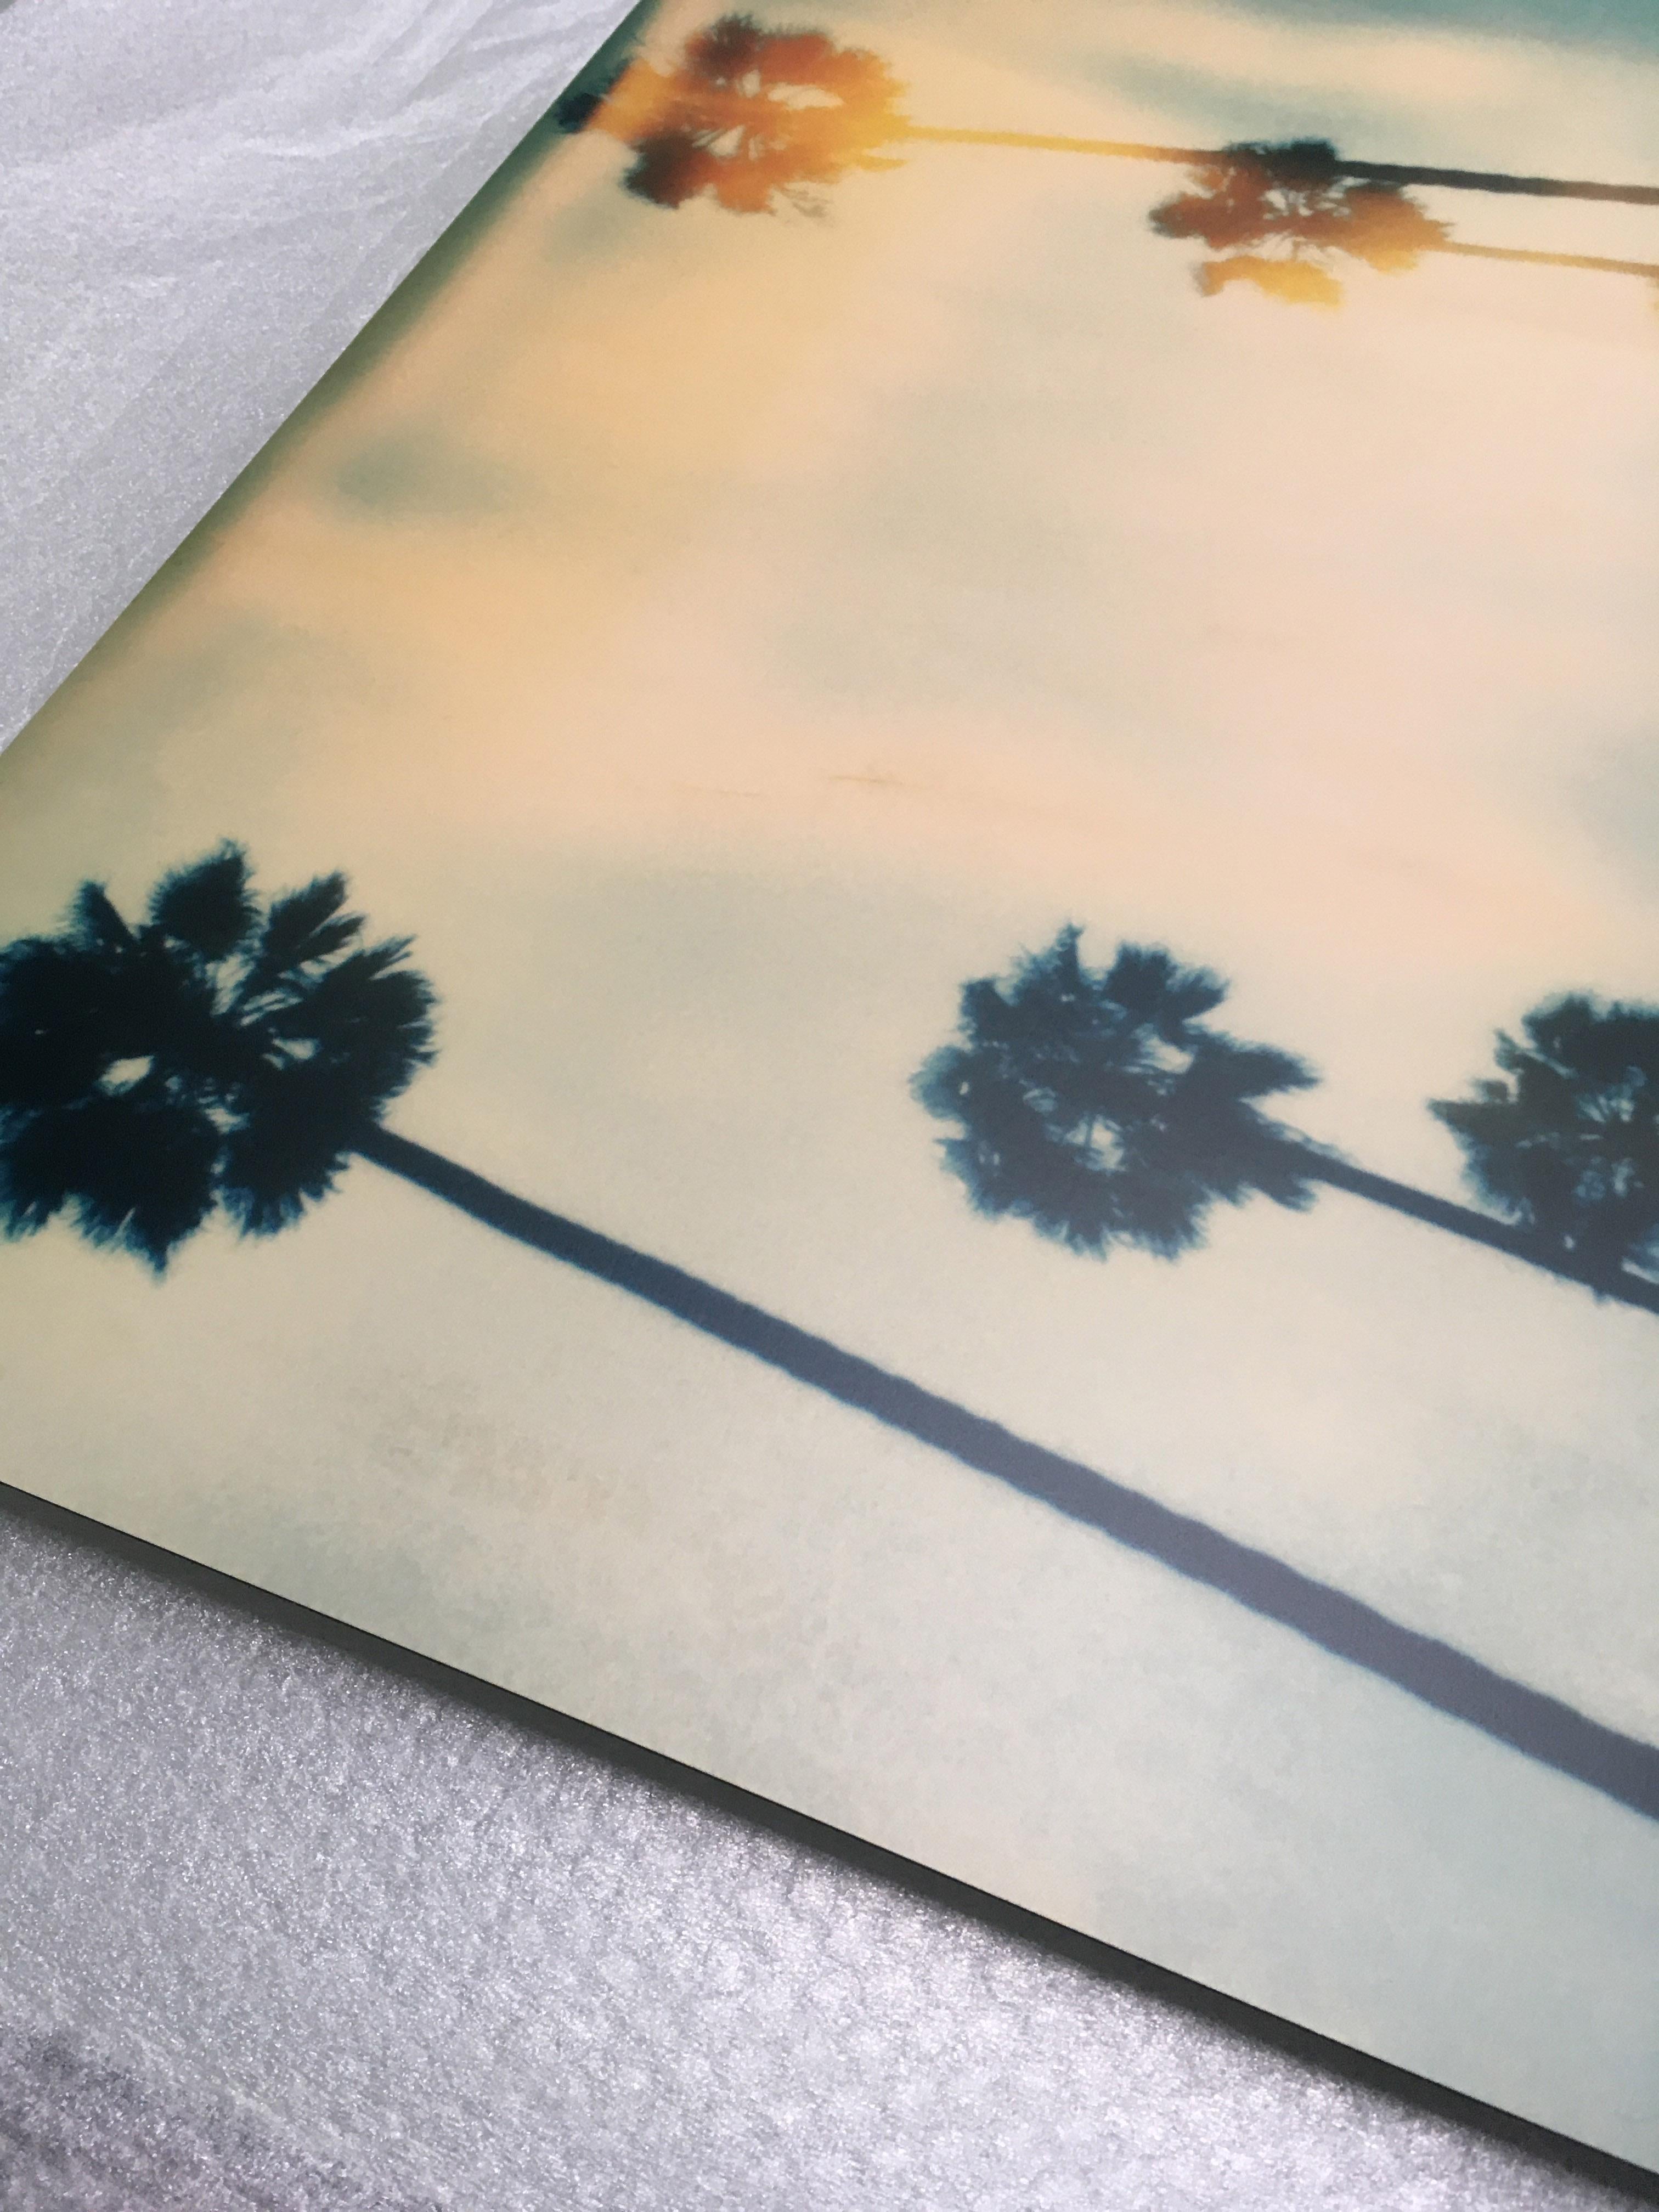 Palm Trees on Wilcox (Stranger than Paradise) 1999, 

80x78cm,  Edition 20/100, 
archival C-Print based on an original Polaroid.  
Mounted on Dibond with matte UV-Protection.
Certificate and signature label.
Artist inventory number: 398. 
Signature